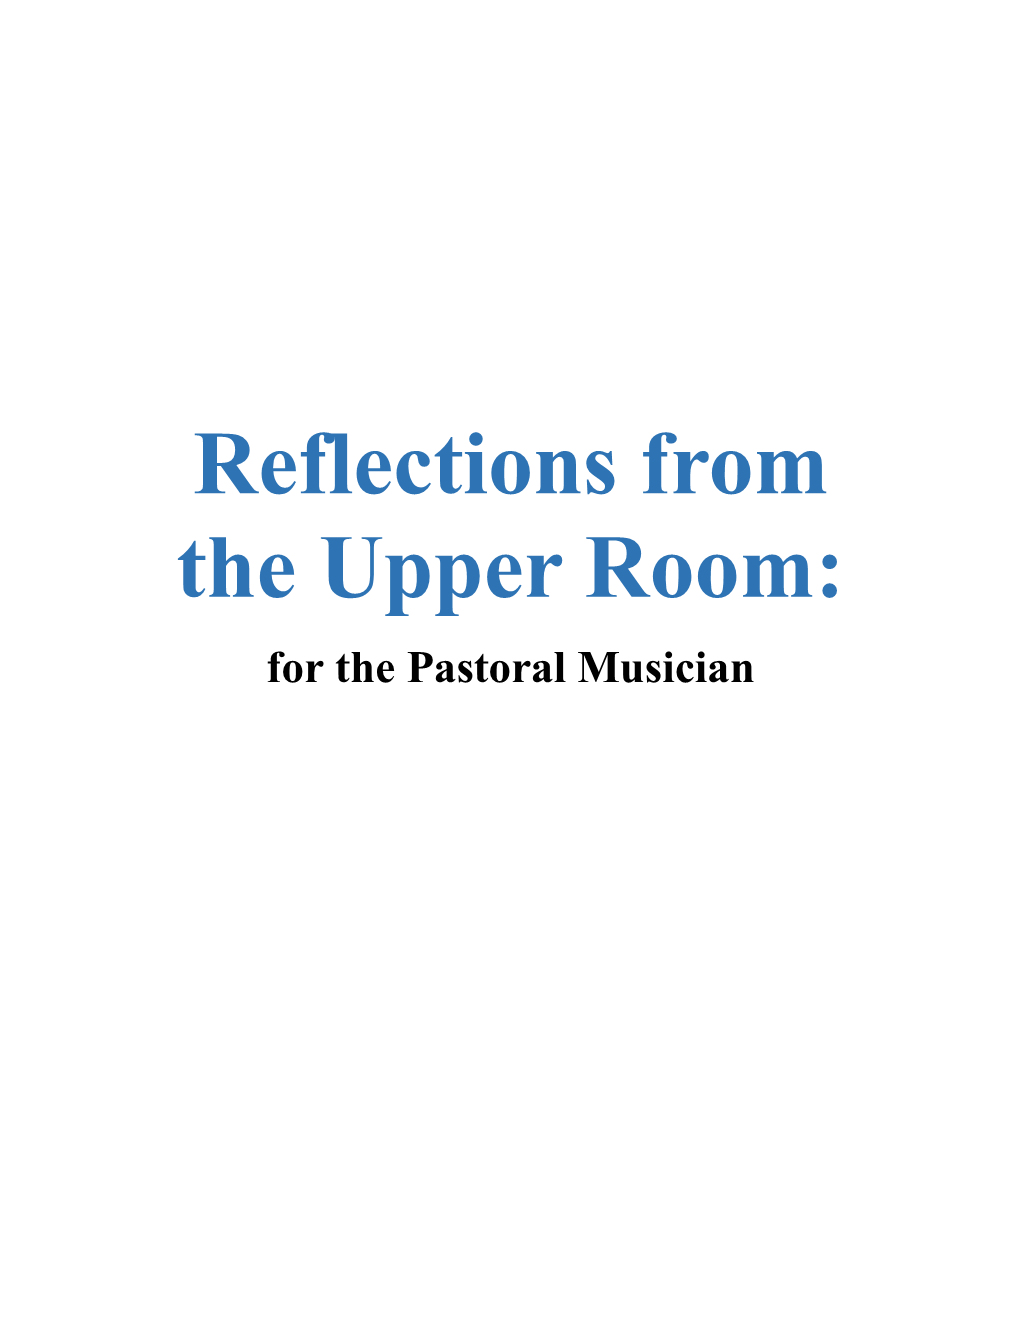 Reflections from the Upper Room